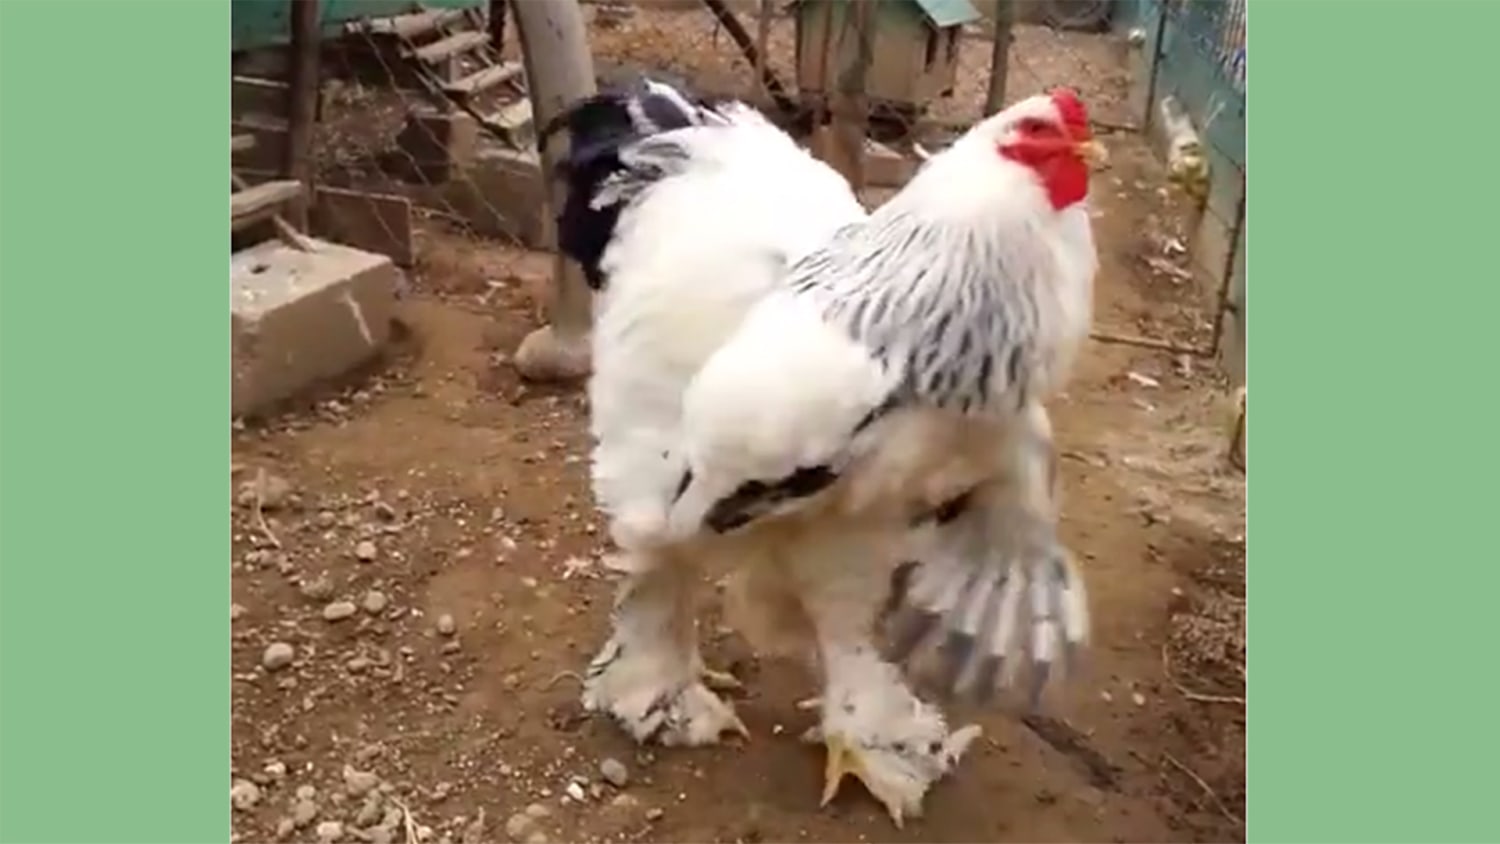 5 things you should know about the GIANT Brahma Chicken –